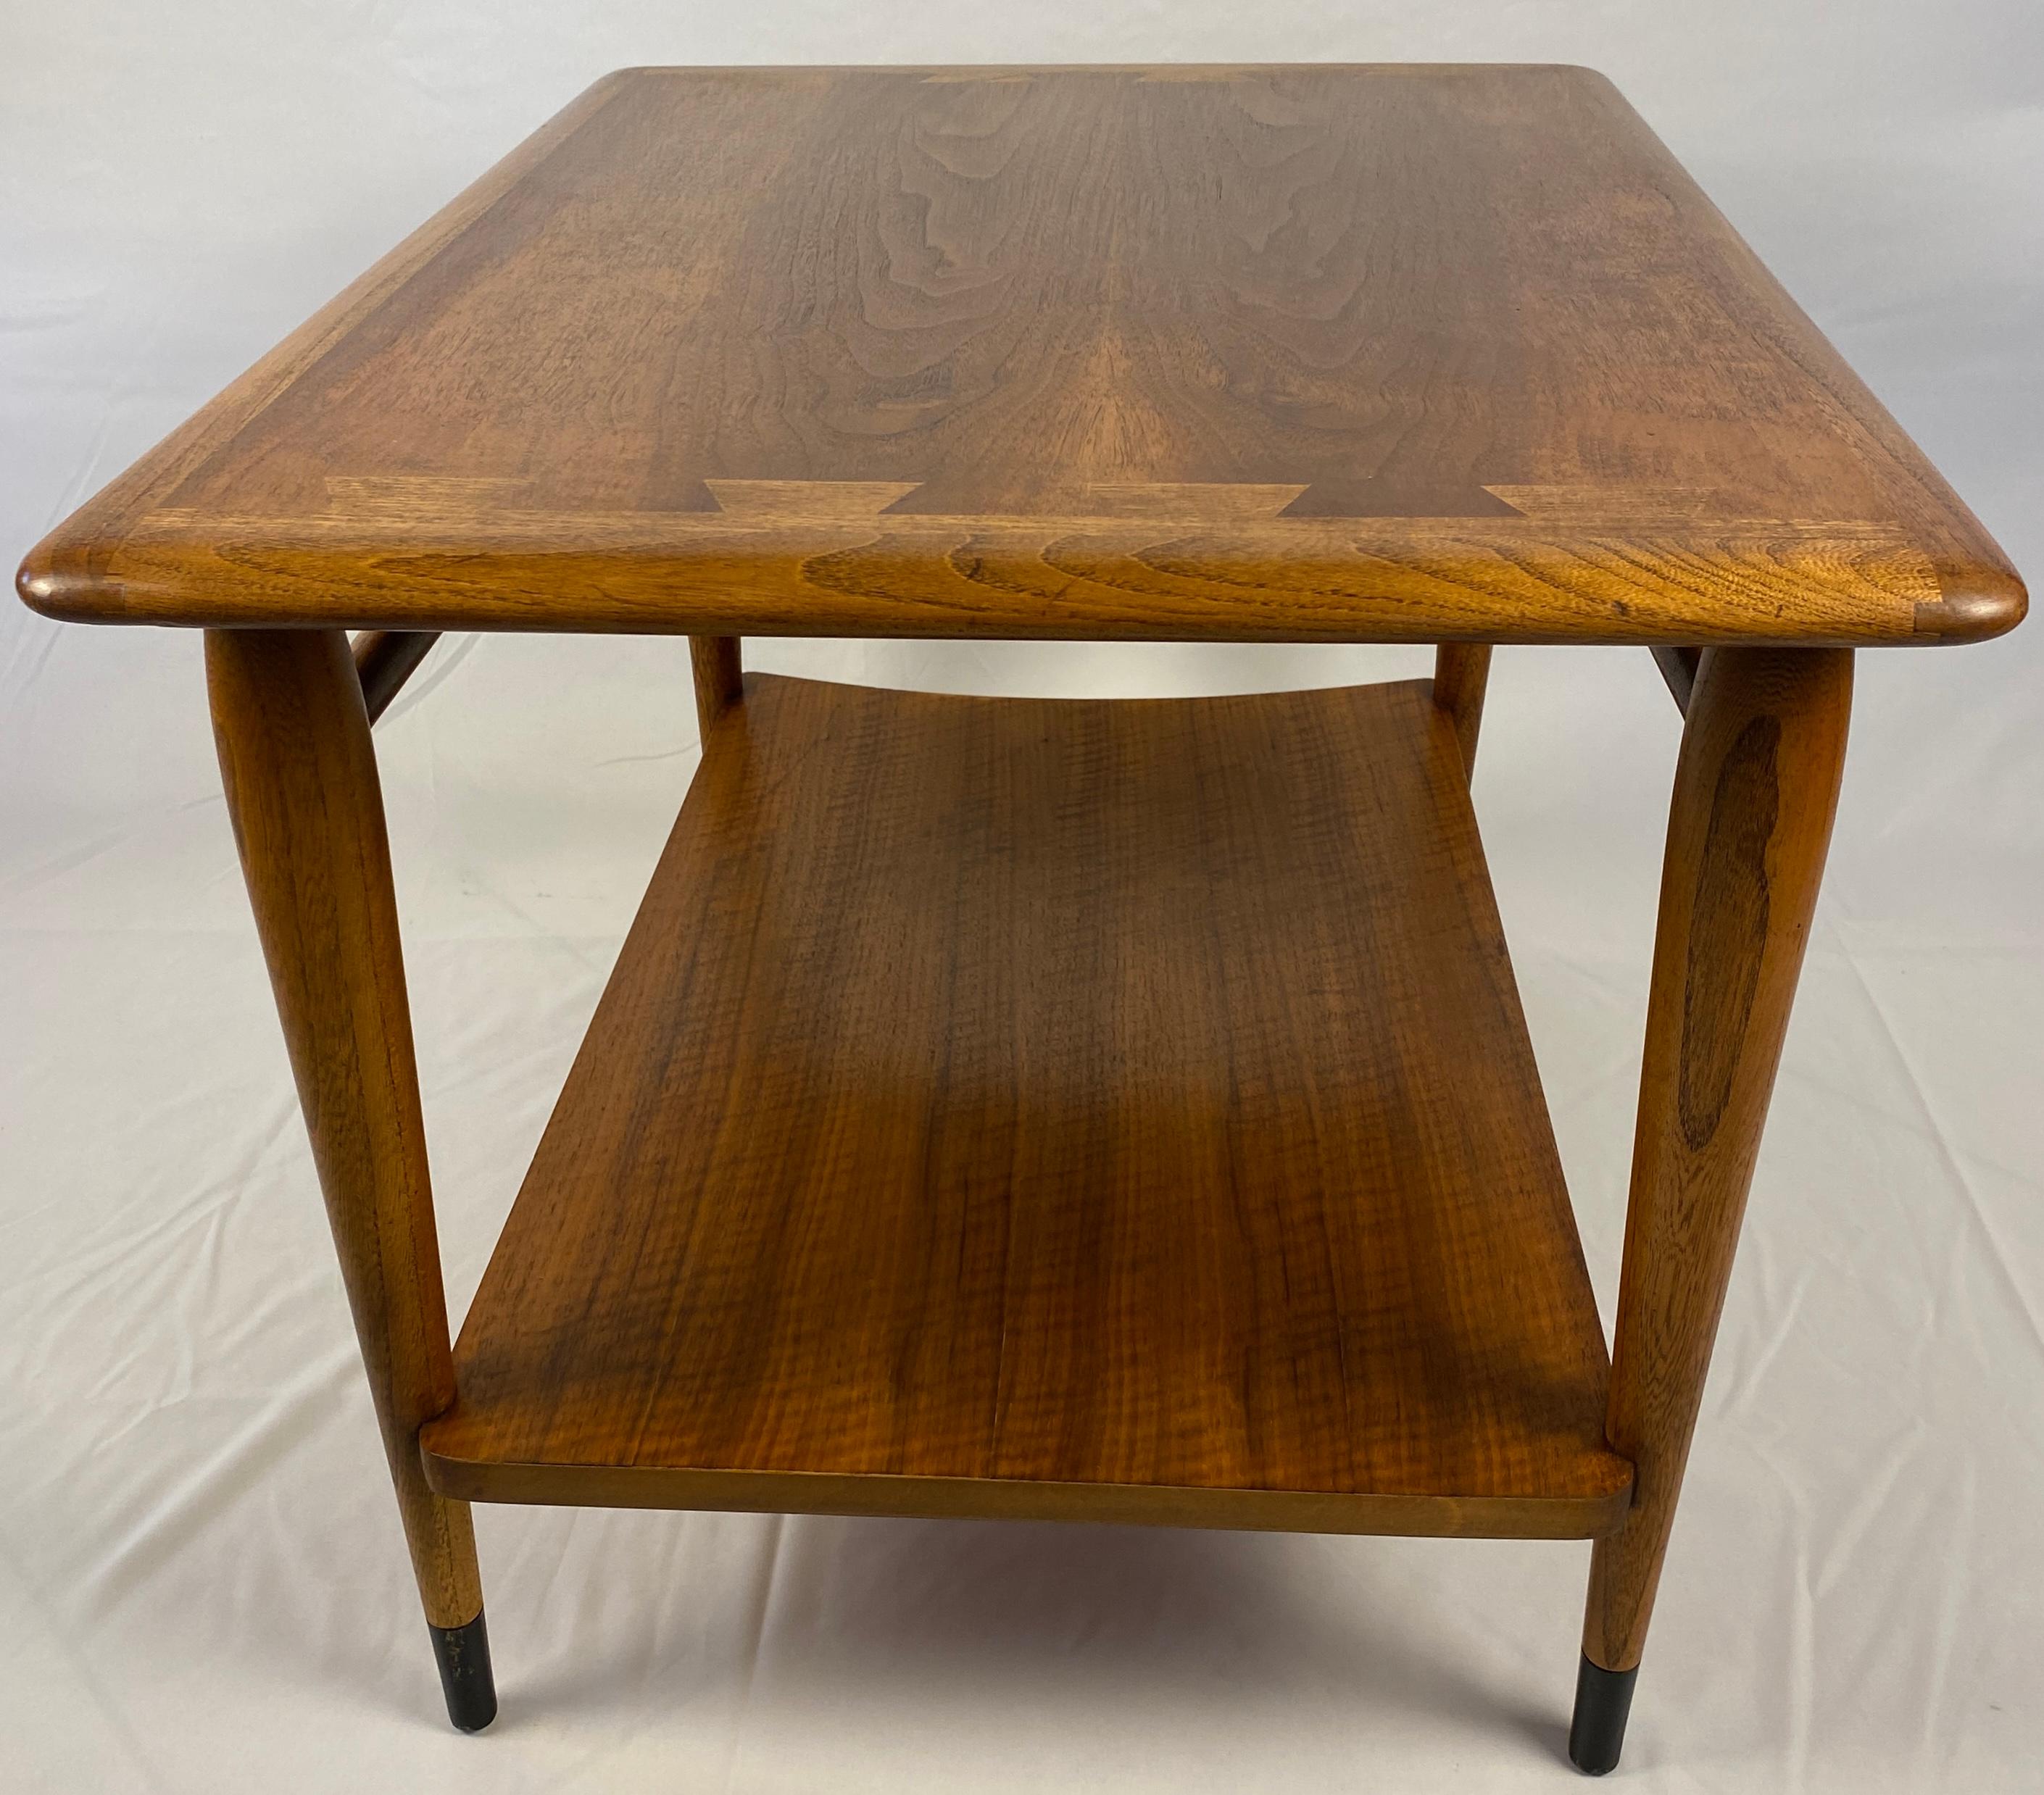 A very stylish Scandinavian style coffee table or end table made of solid walnut.  Clean lines and natural groves of the wood enhance the design of the gorgeous Scandinavian style wooden coffee table or end table. The bottom shelf is a helpful